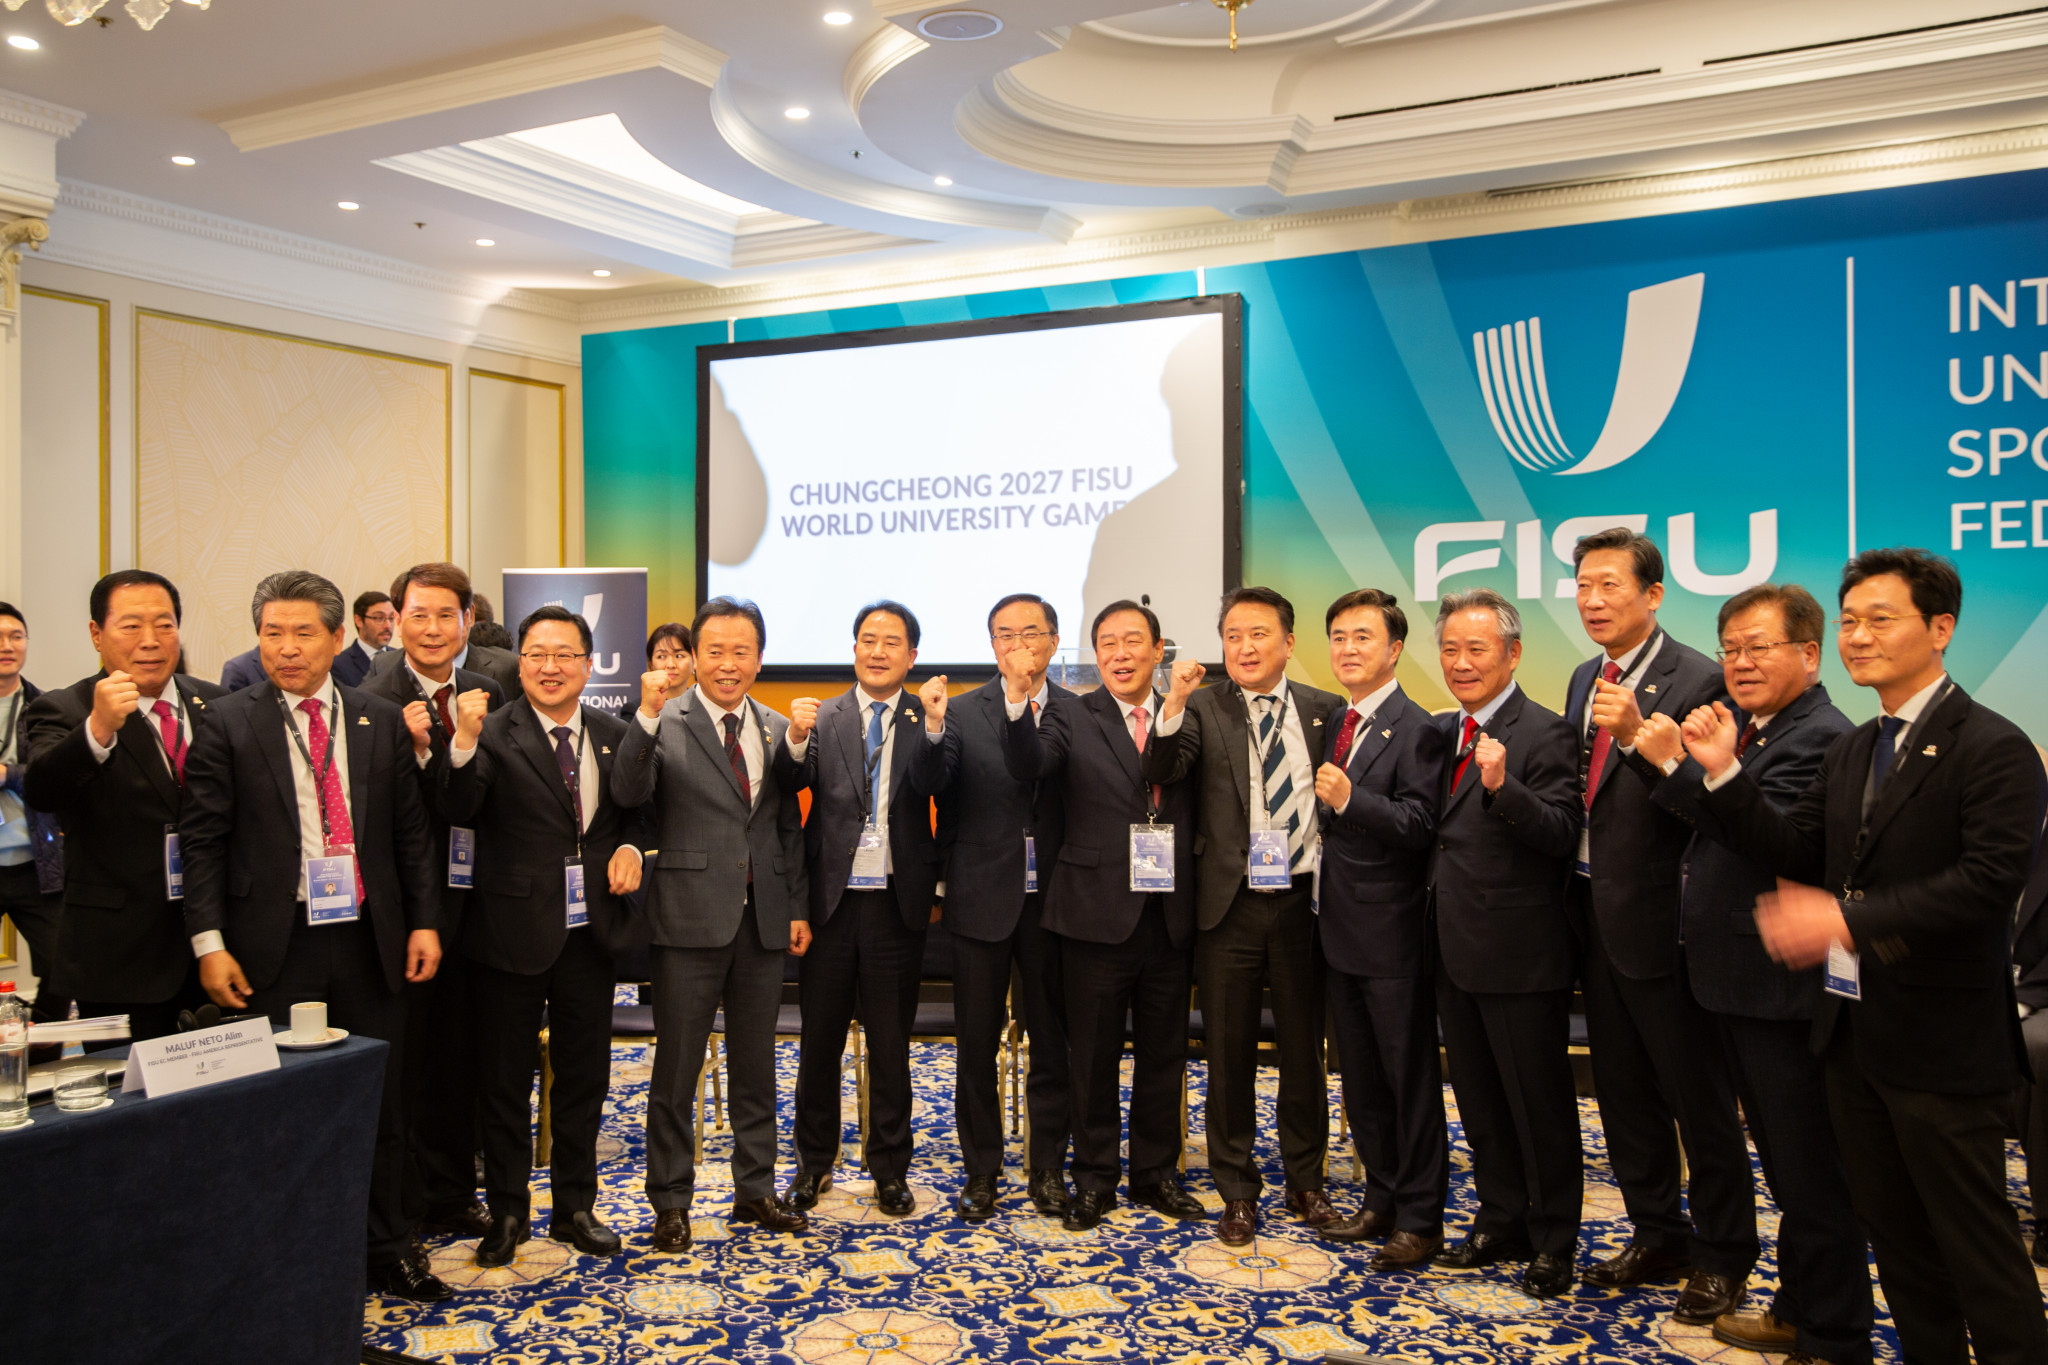 The Chungcheong 2027 Organising Committee was only formed in July despite the Games being attributed to the South Korean bid last November ©FISU